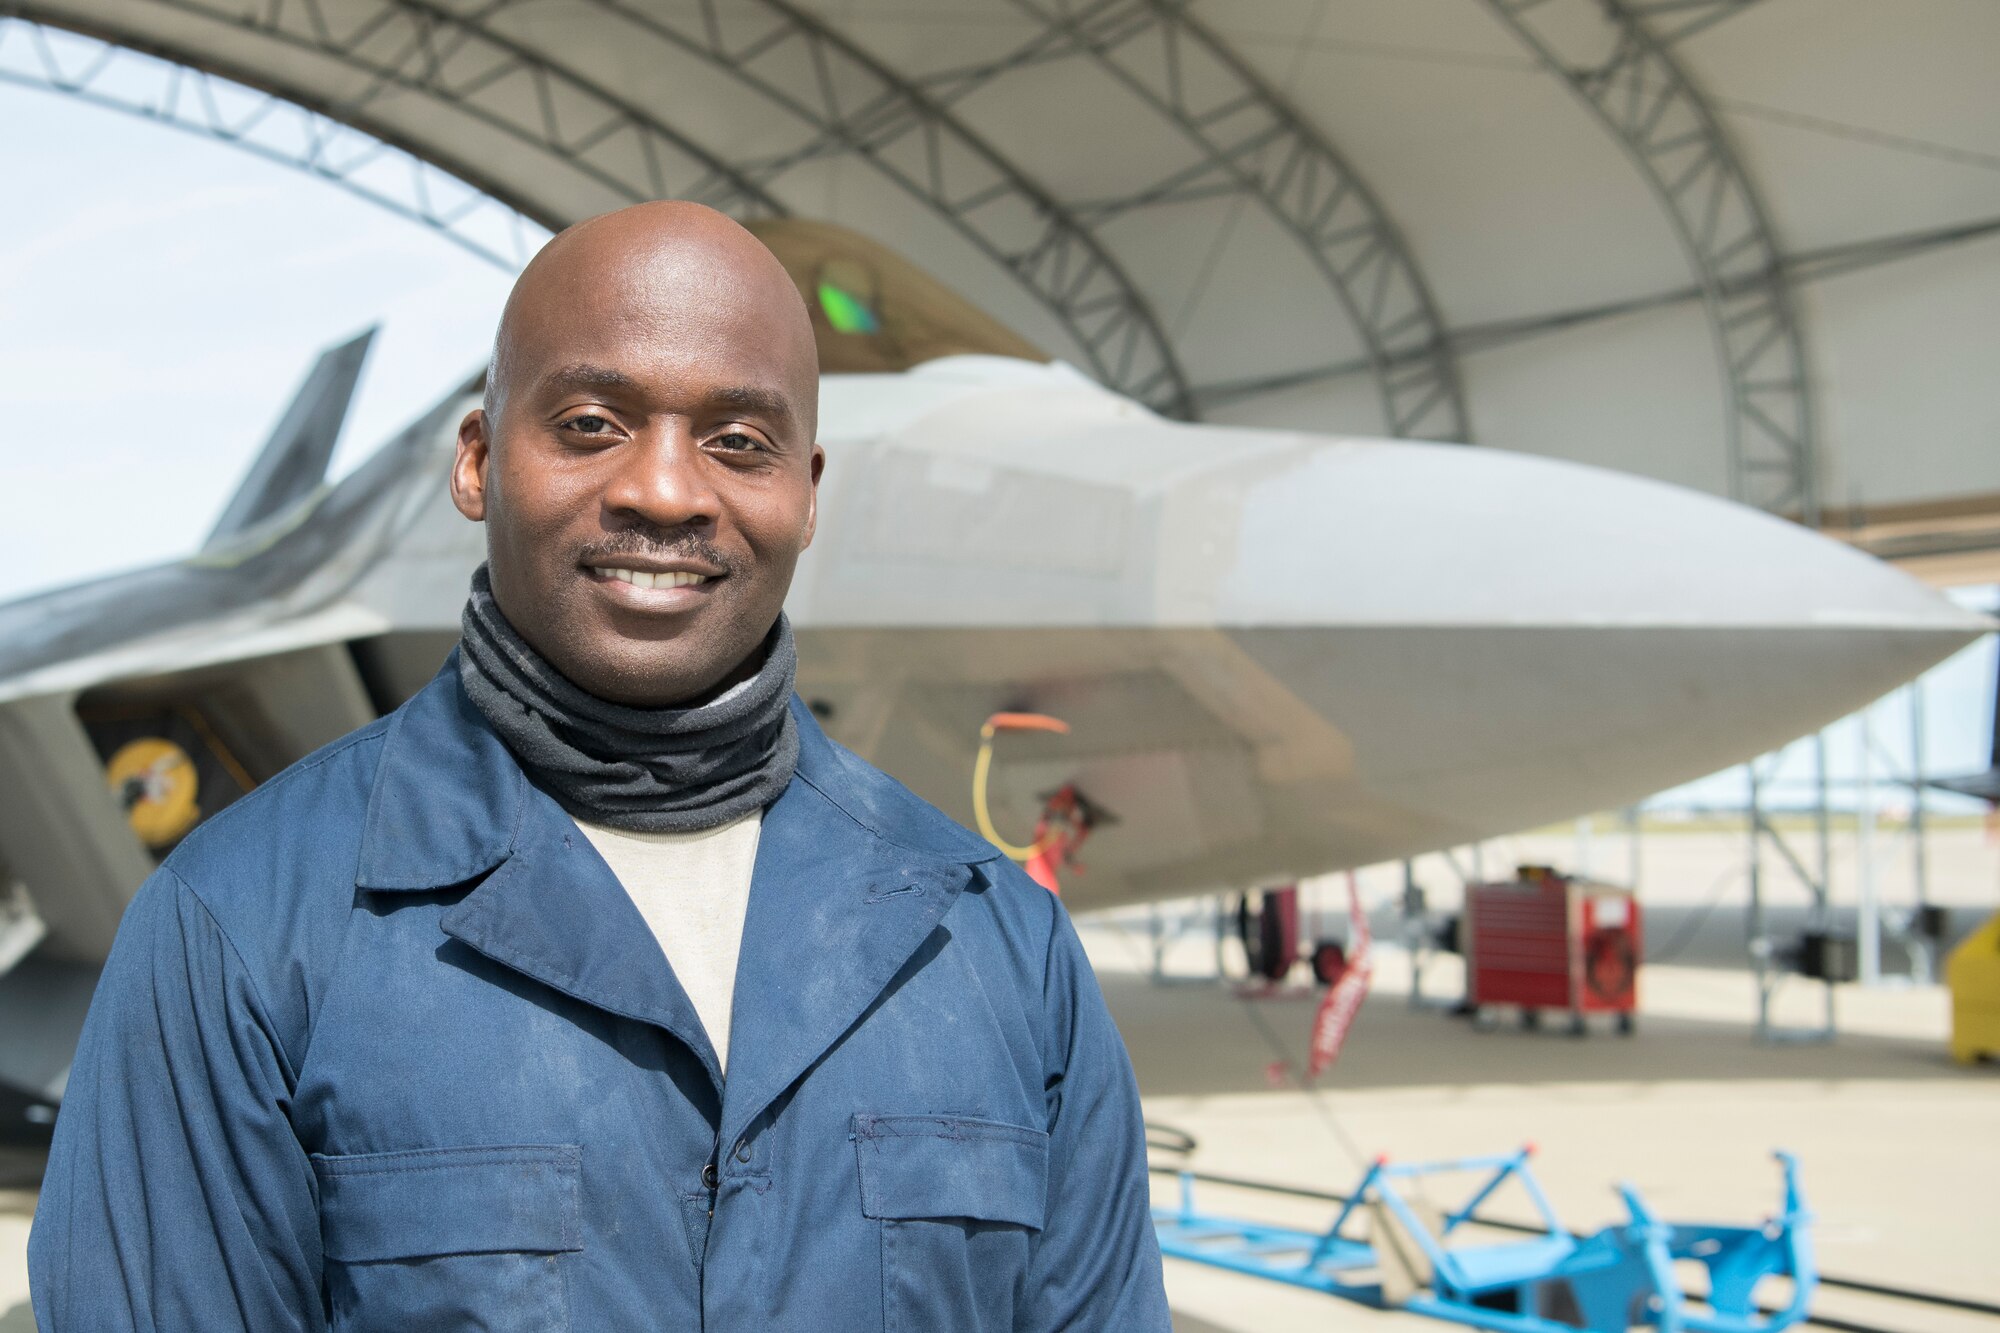 A man wearing blue coveralls smiles for a portrait in front of a jet